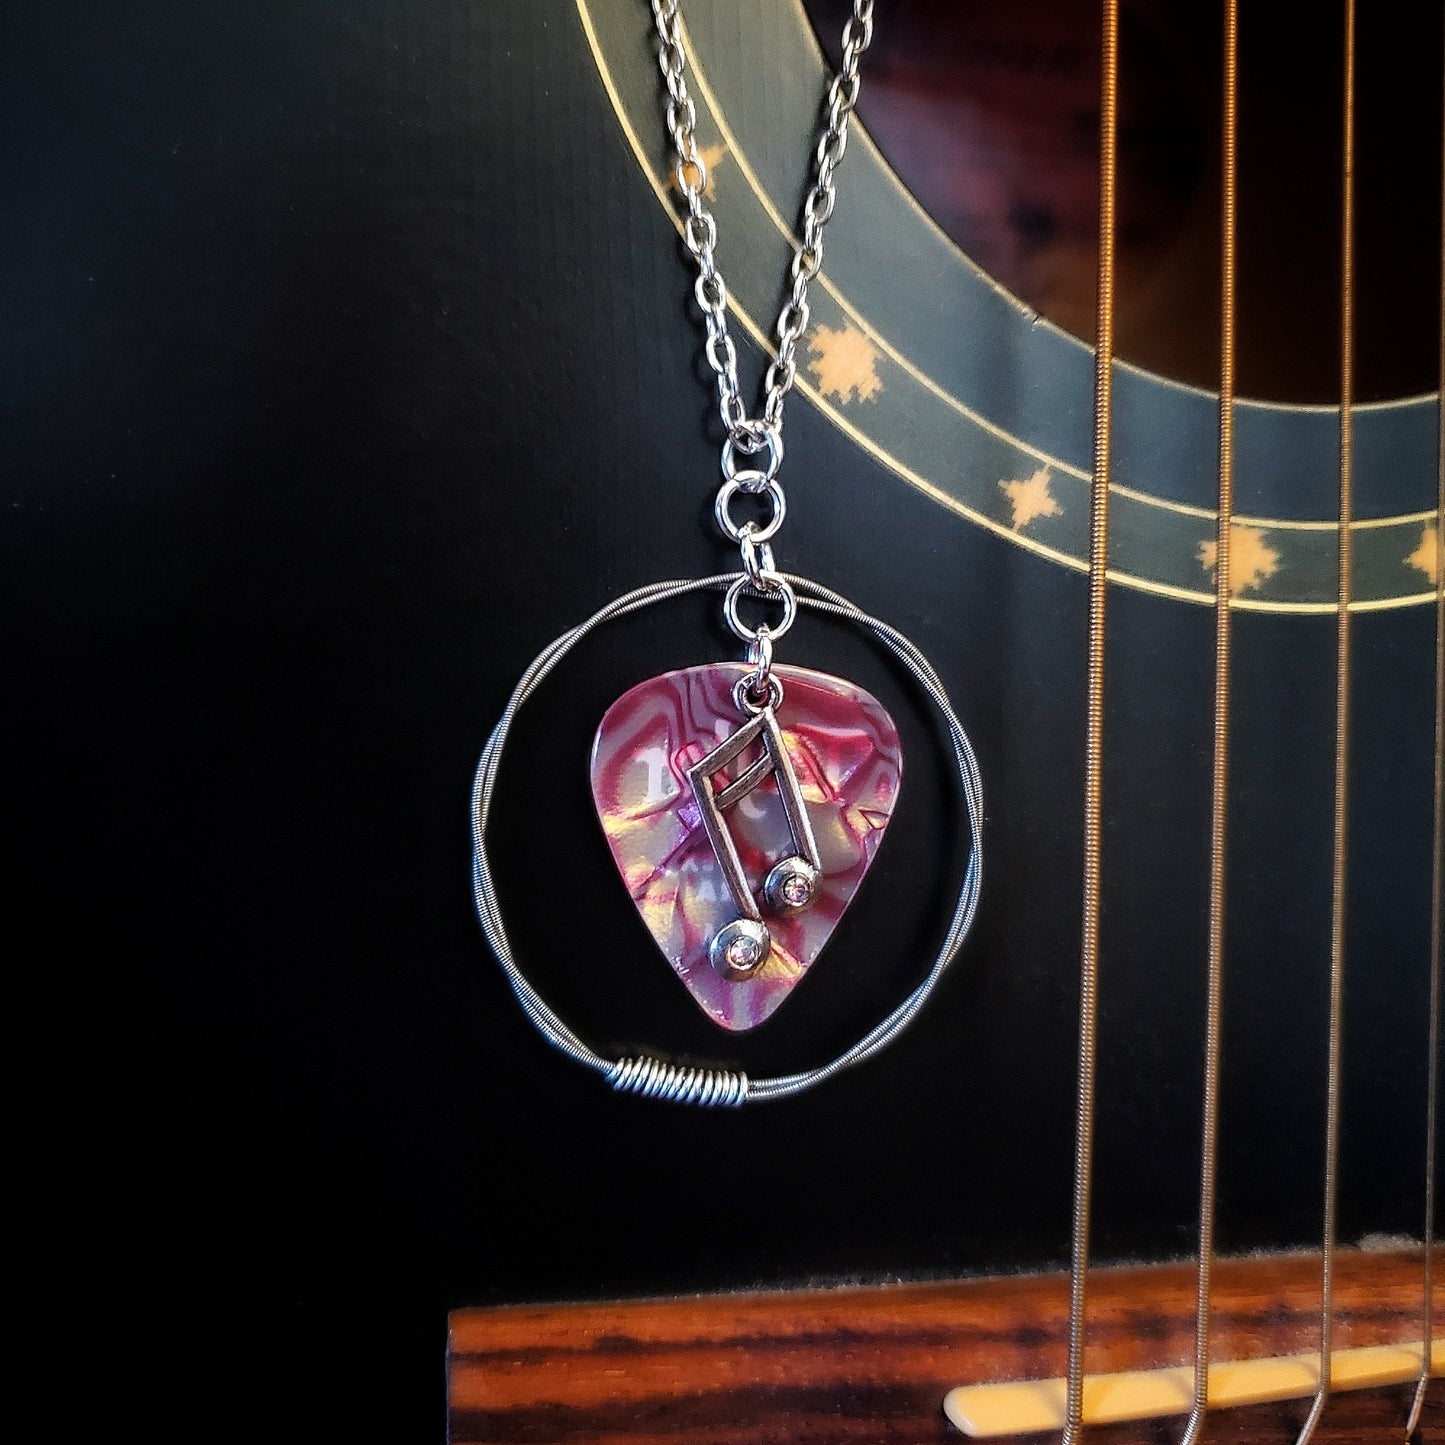 A necklace made from a red marbled guitar pick and upcycled guitar strings with a silver coloured chain hangs in front of a black guitar